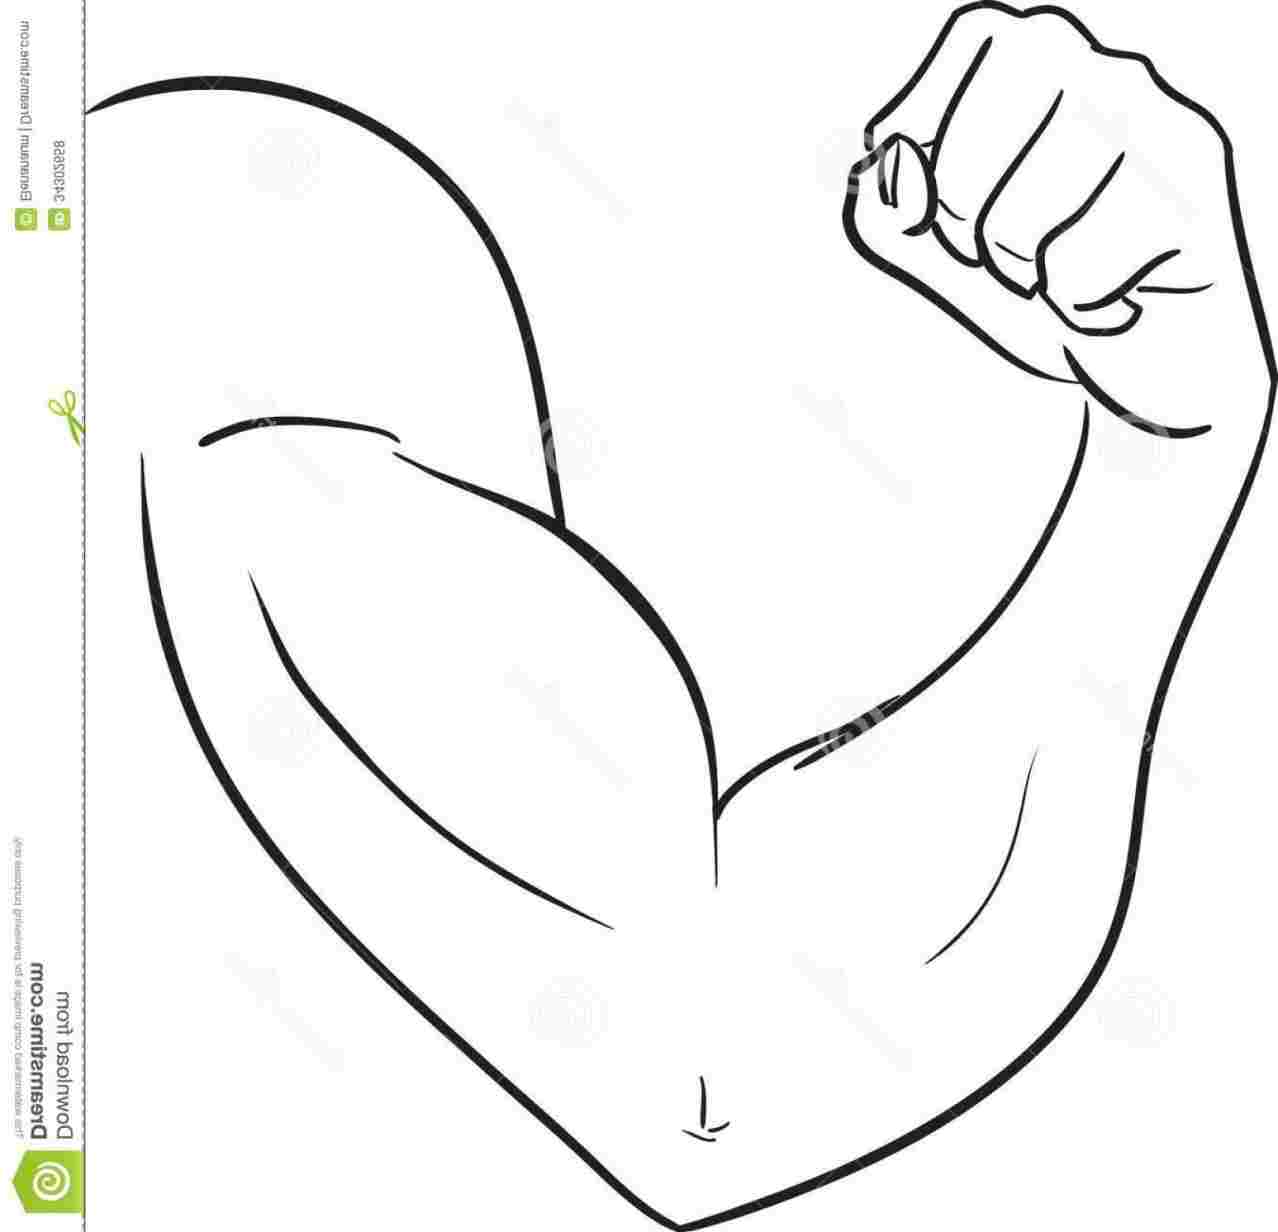 Arms clipart black and white